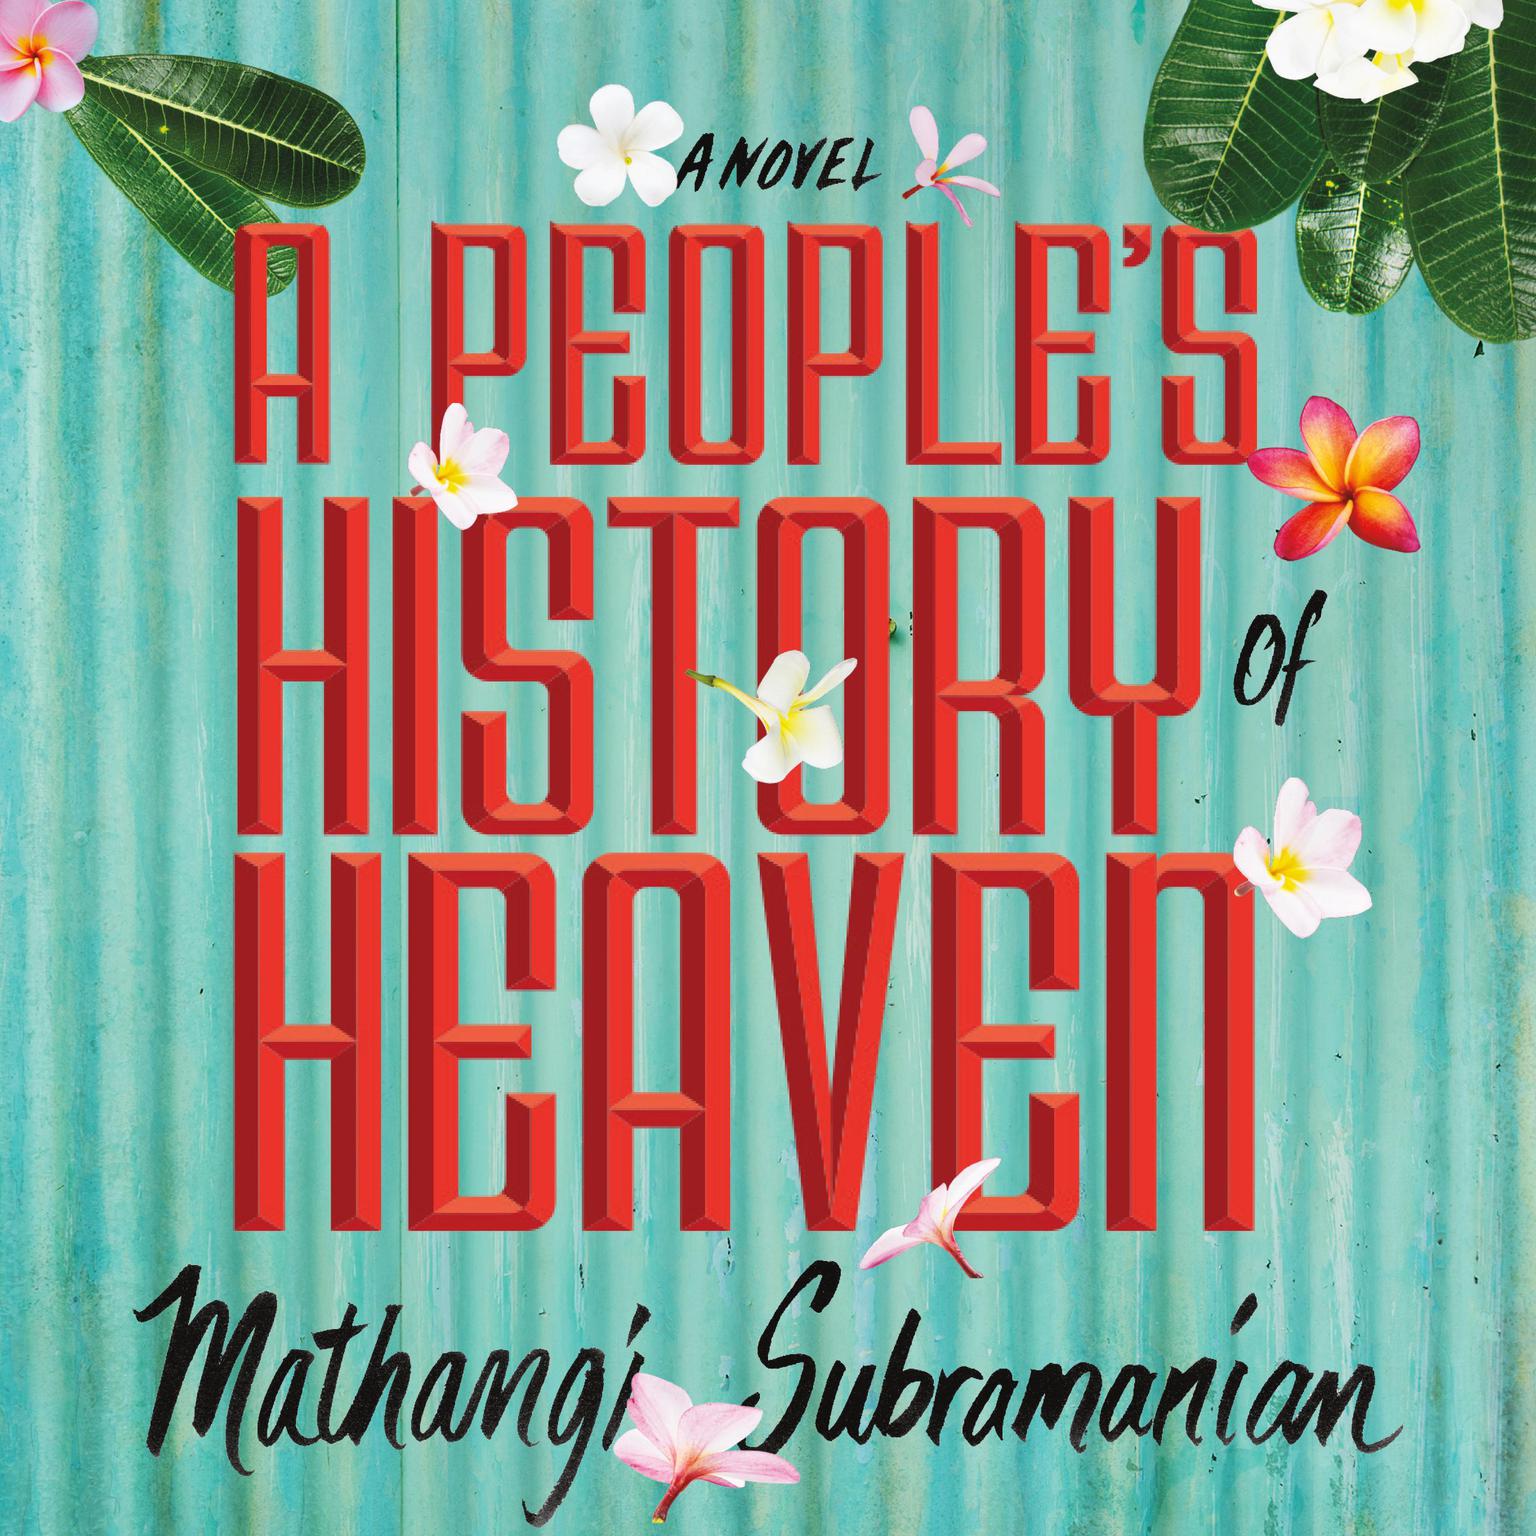 A Peoples History of Heaven Audiobook, by Mathangi Subramanian